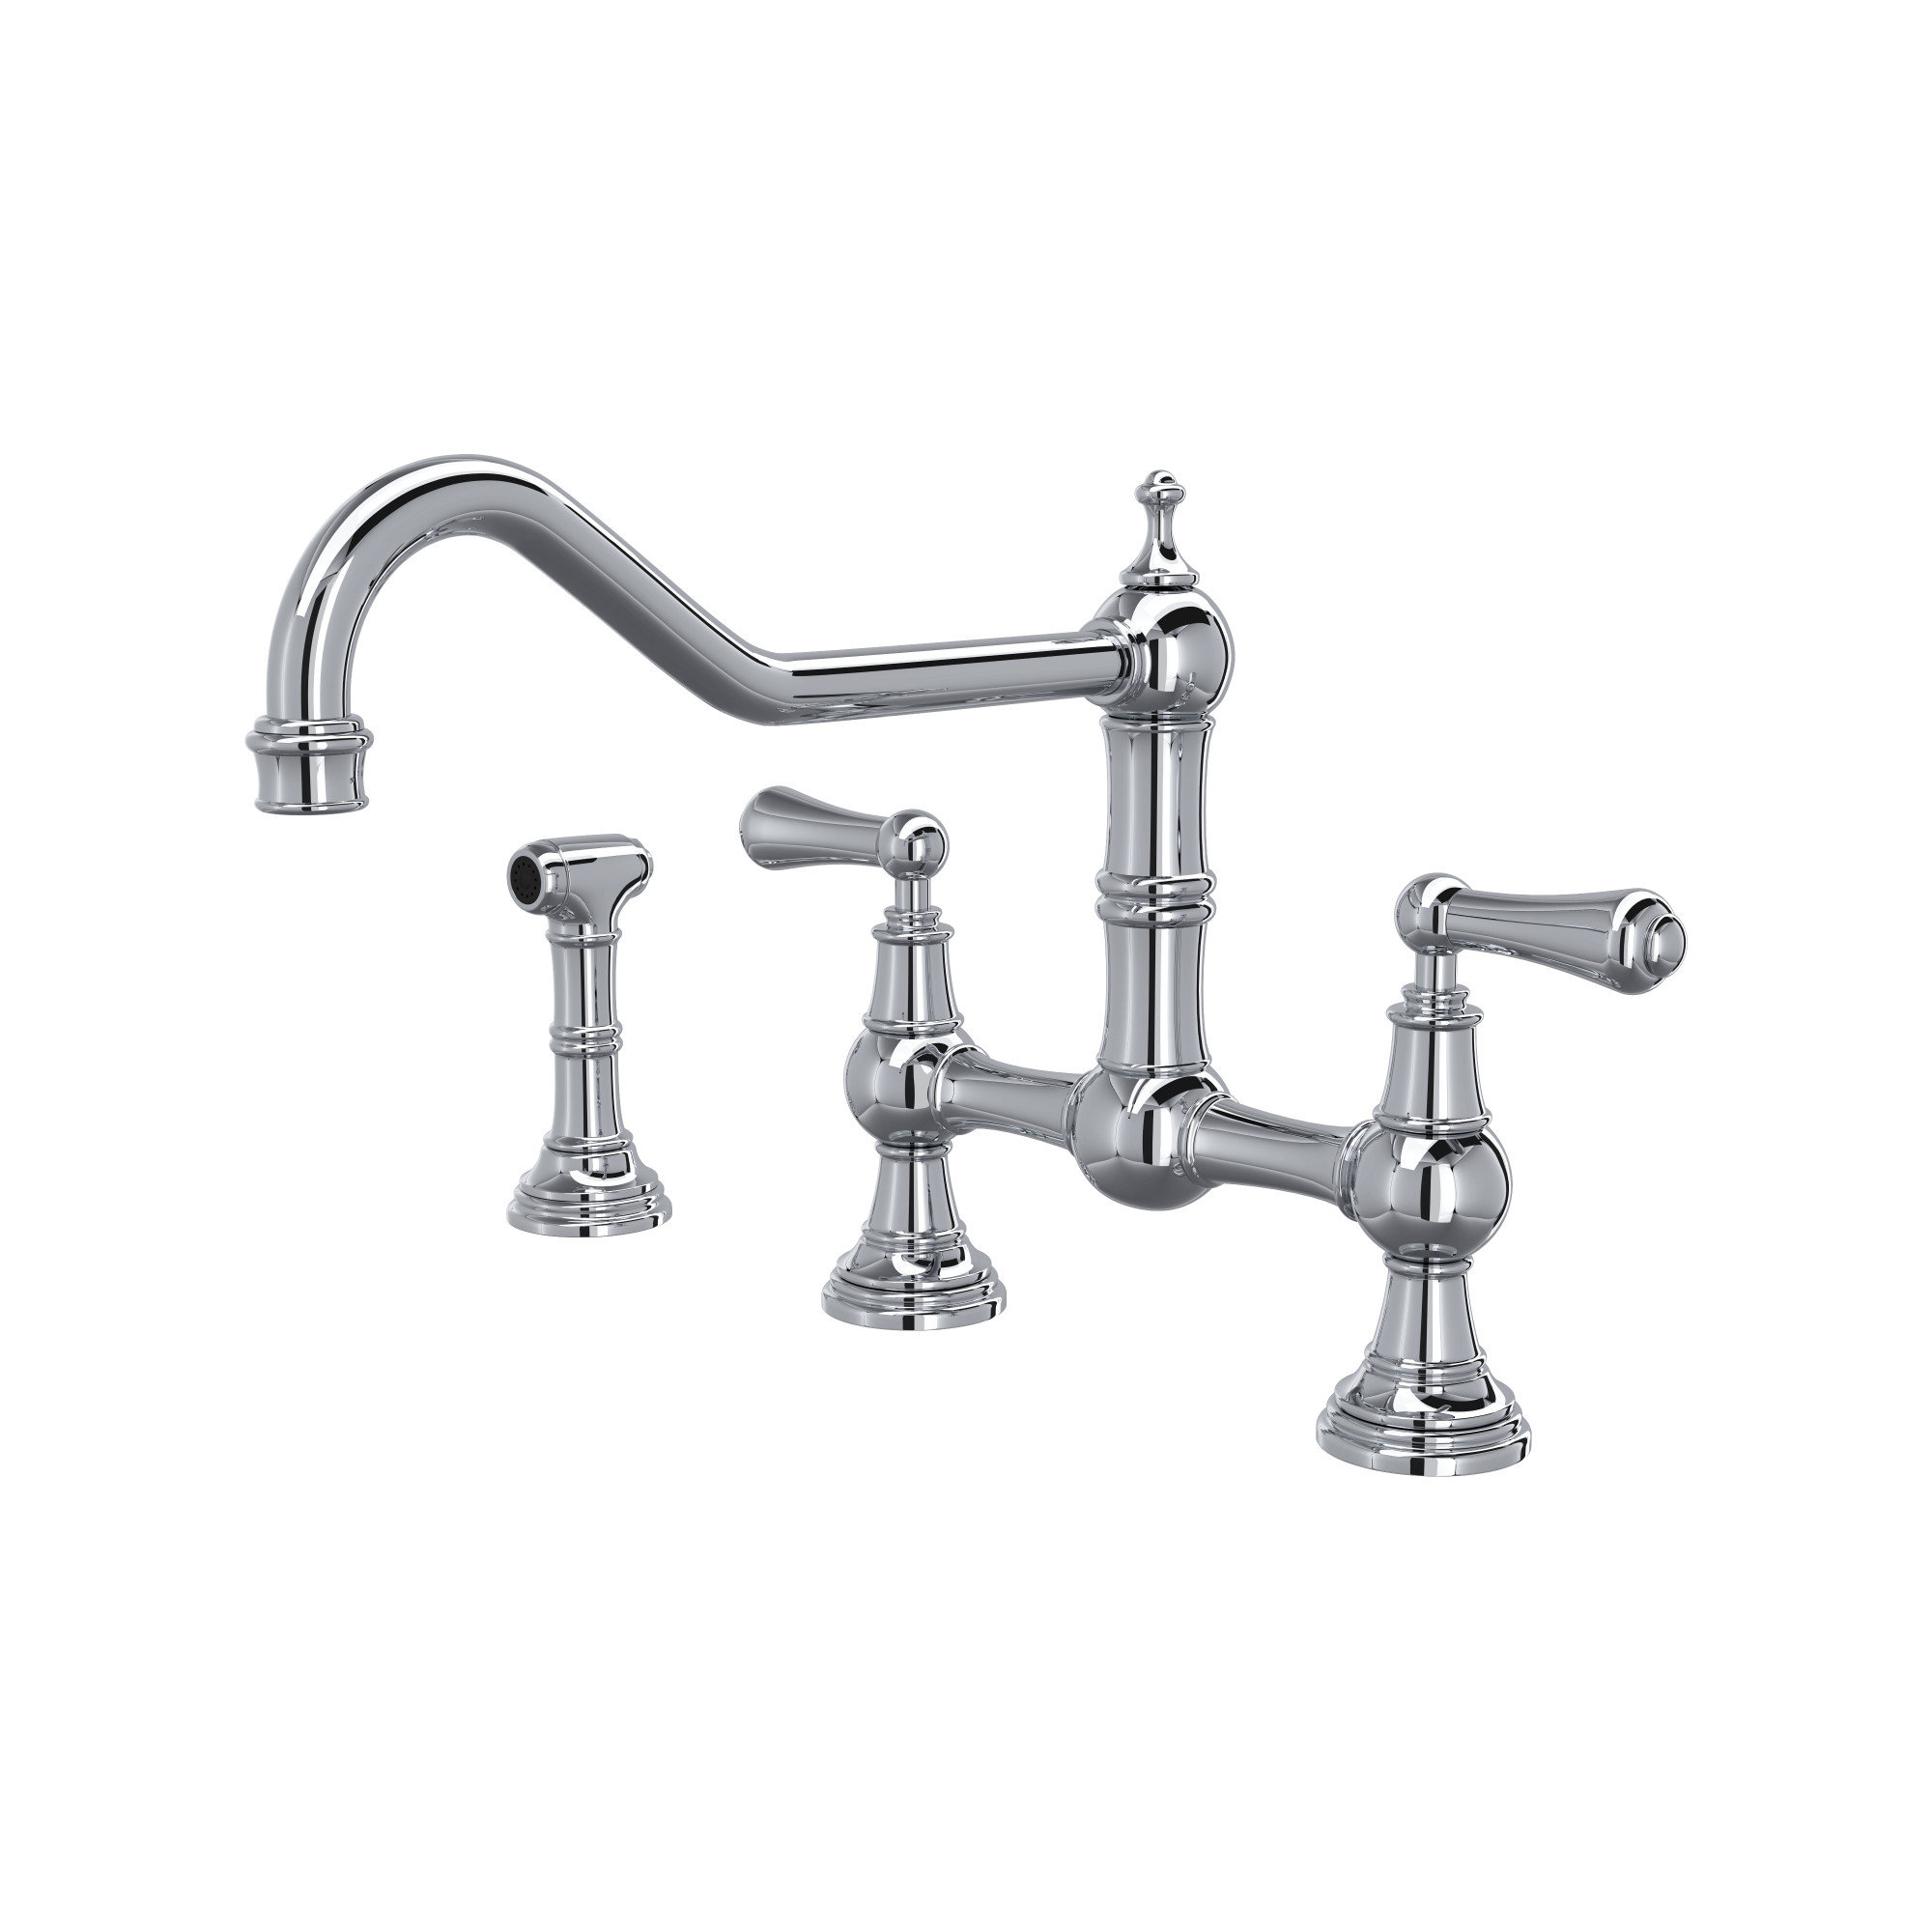 Polished Chrome Edwardian™ Perrin and Rowe® Provence Two Handle Widespread  Bridge Faucet with Side Spray Rinse (Part number